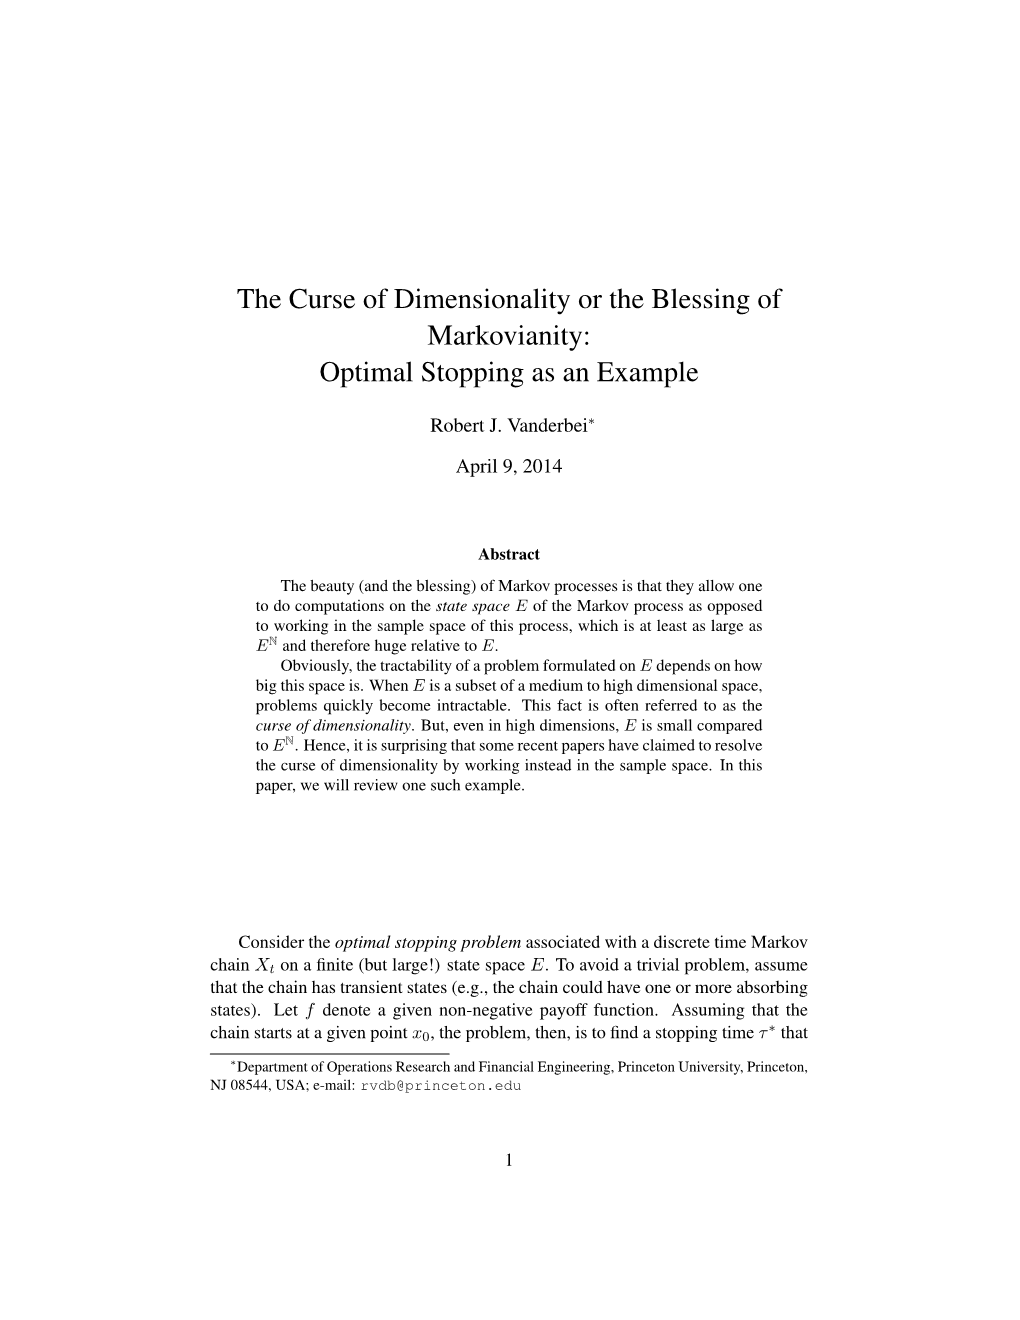 The Curse of Dimensionality Or the Blessing of Markovianity: Optimal Stopping As an Example